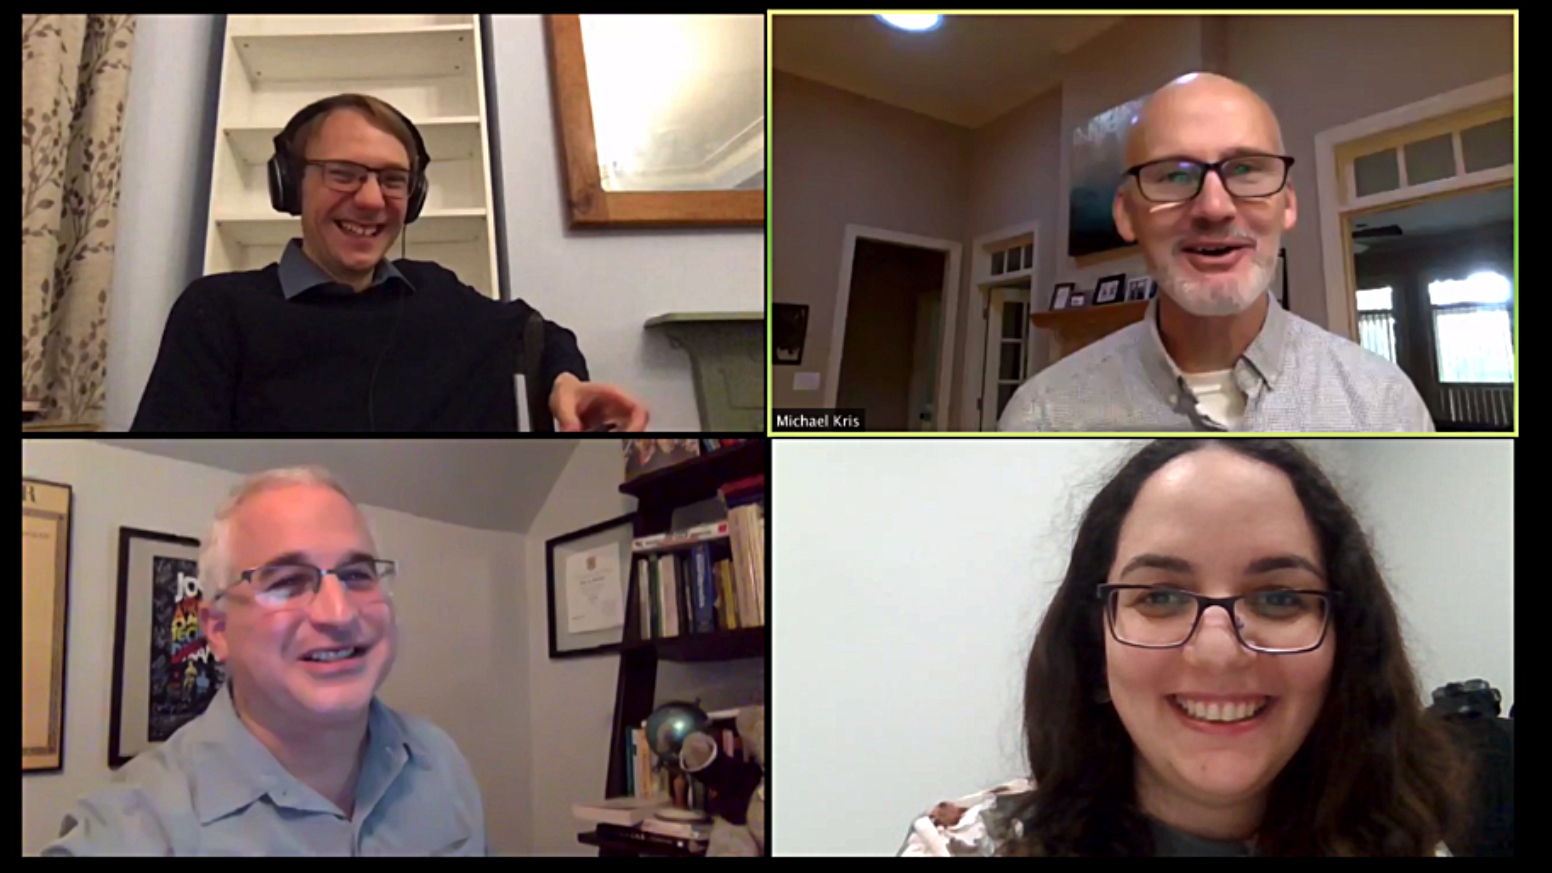 Zoom meeting with four smiling people, three men and one woman.